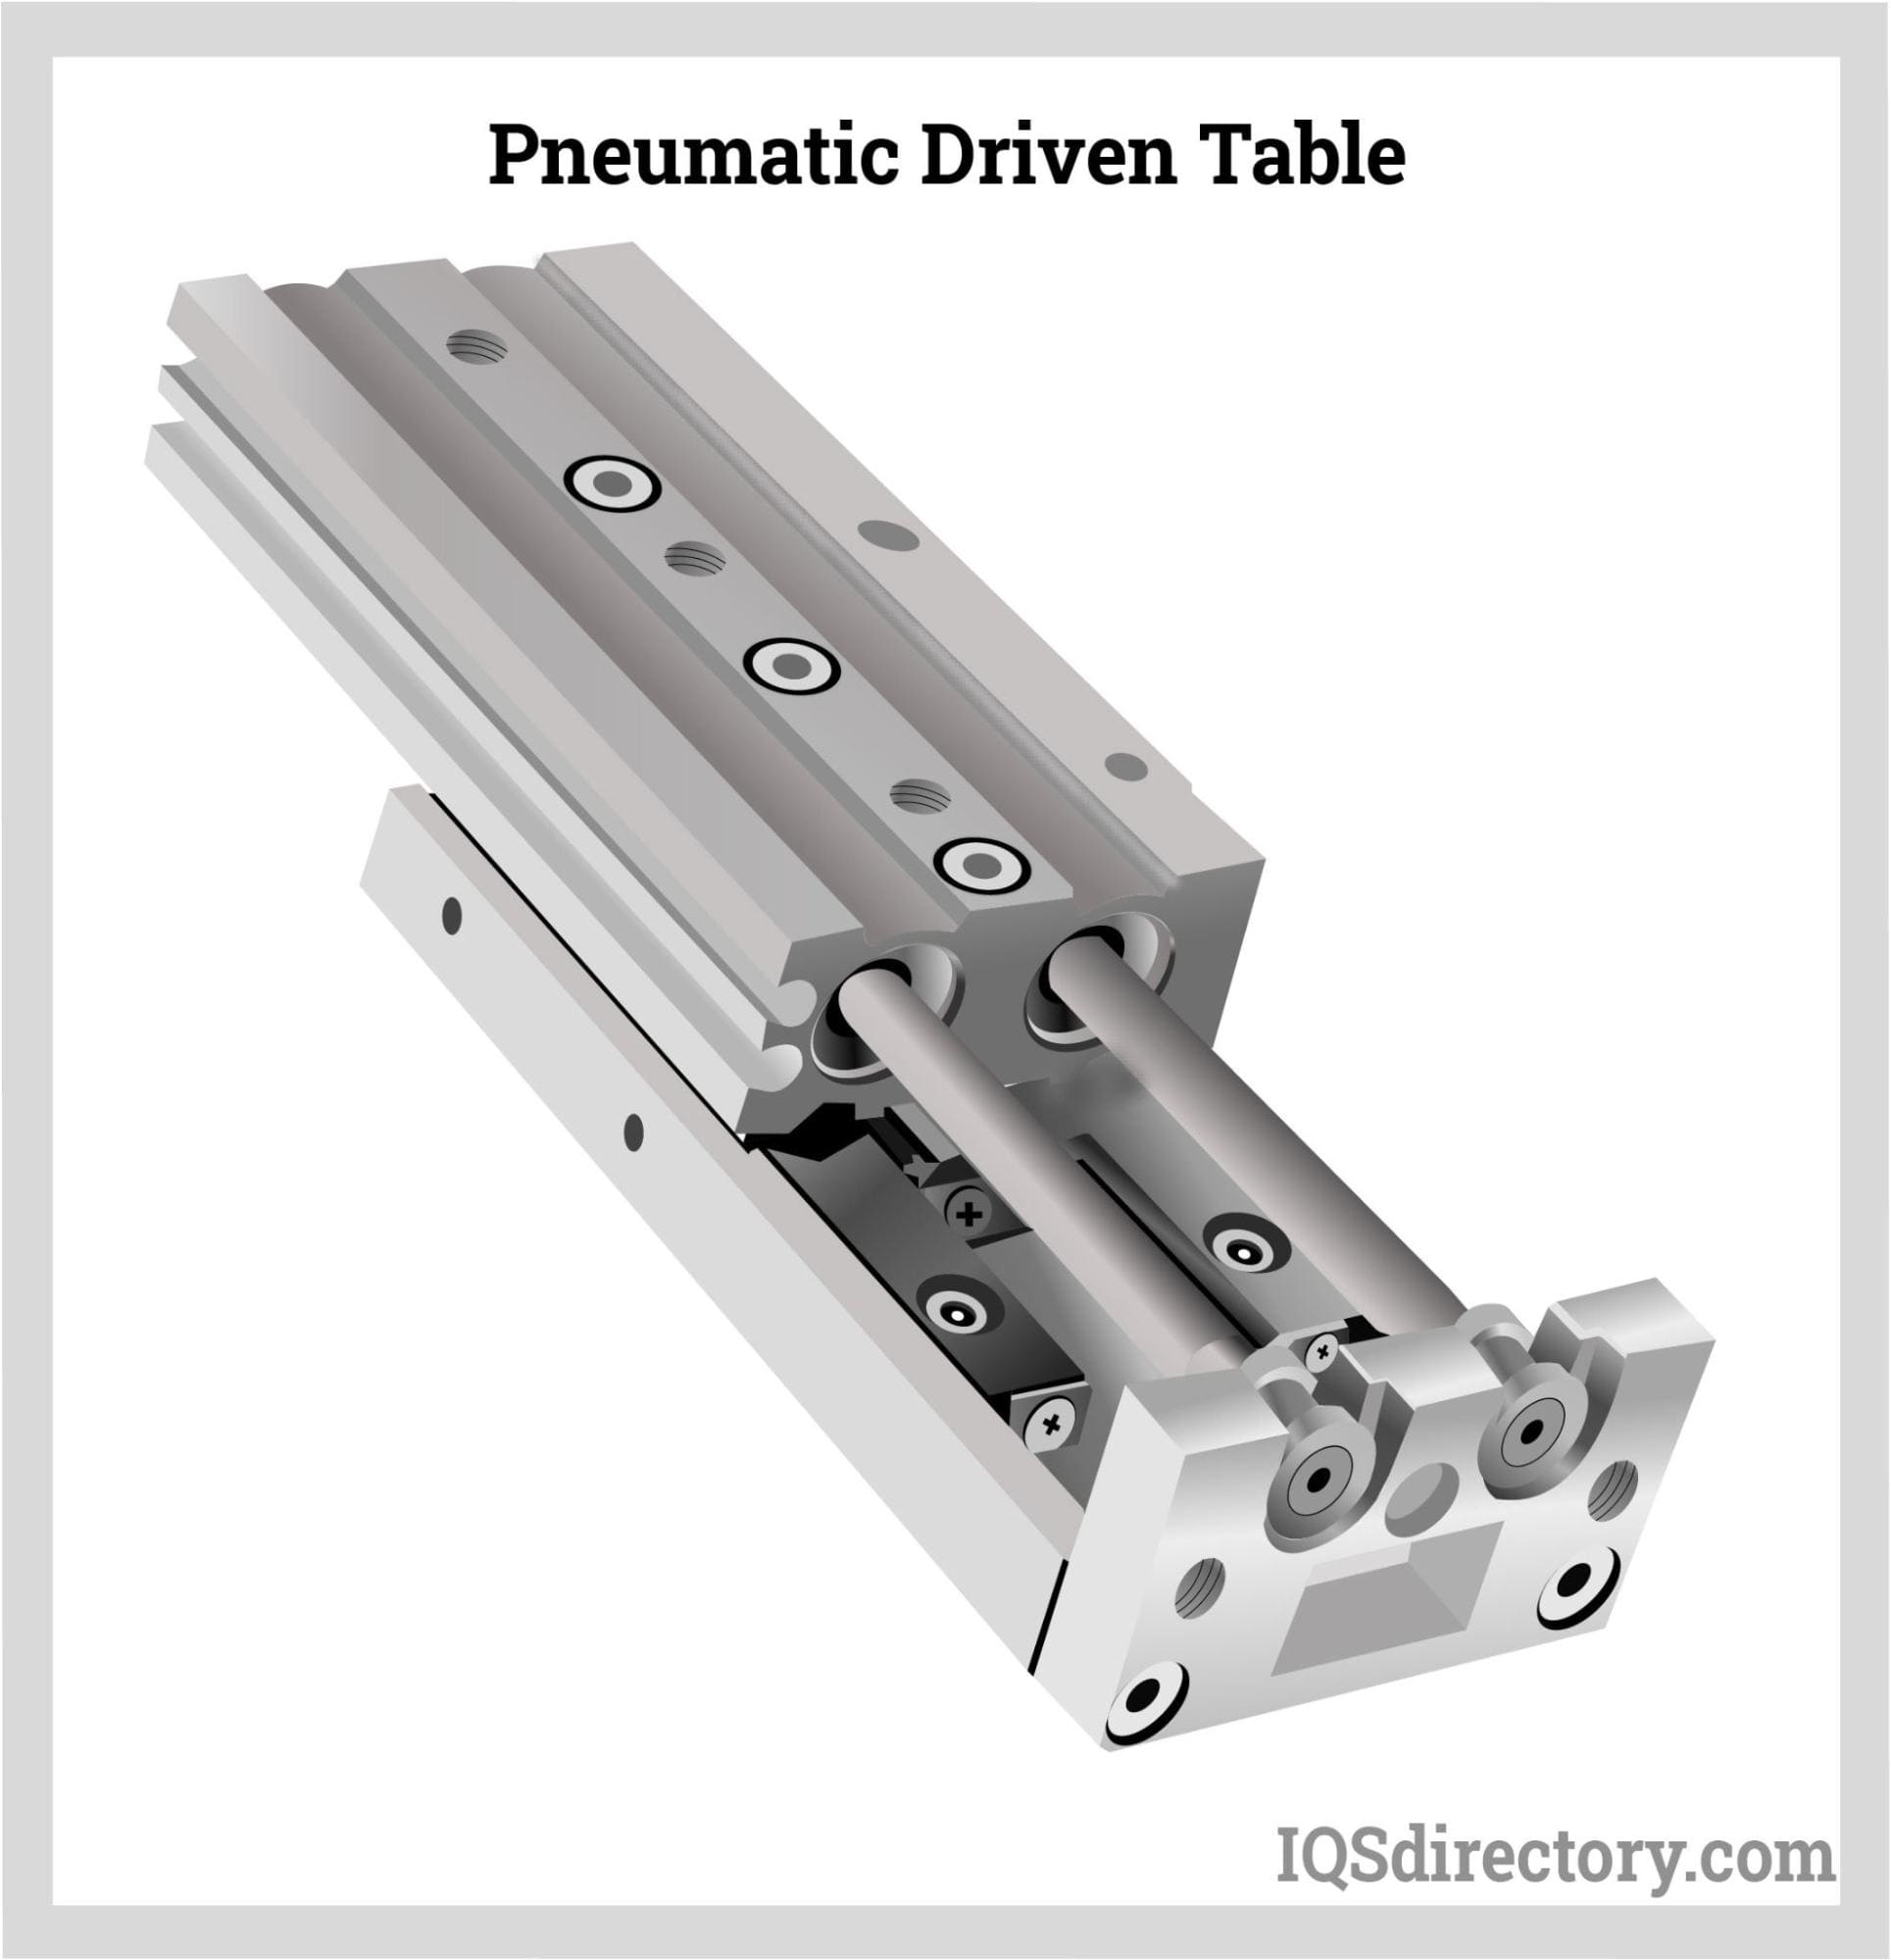 Pneumatic Driven Table